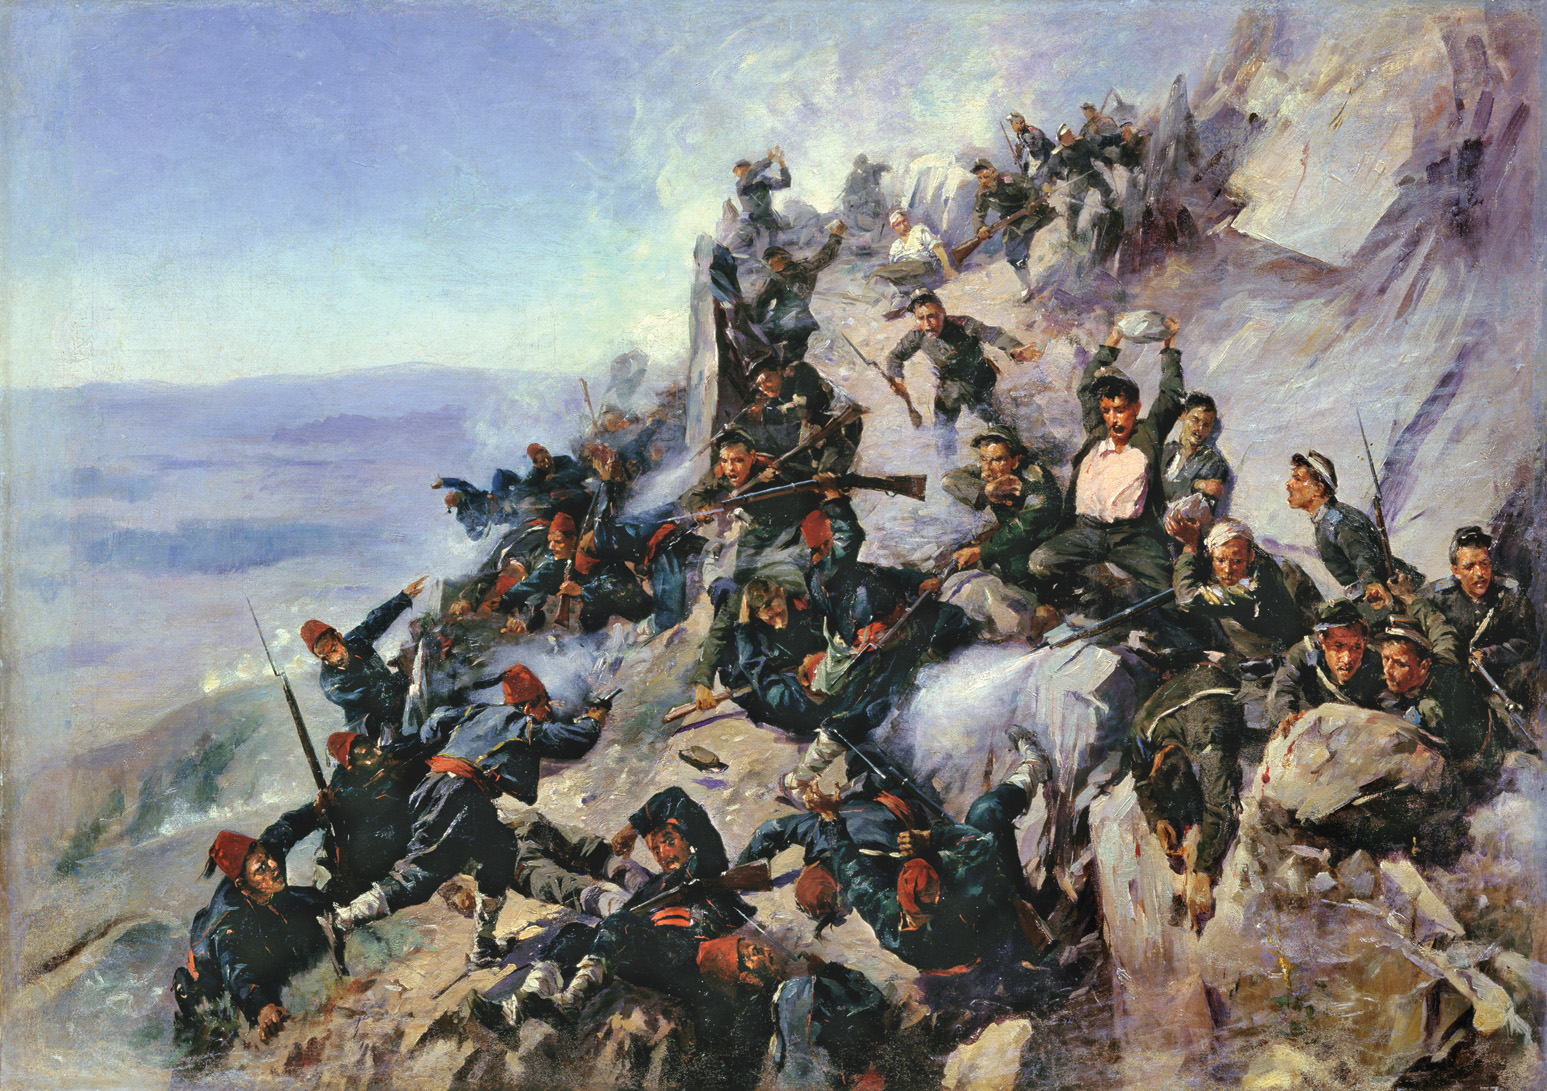 A contemporary painting of the Battle of Shipka Pass shows Russian troops fending off a desperate attack by the Turks. Russian General Mikhail Skobelev distinguished himself during the Russo-Turkish War of 1877-1878 by capturing the strategic mountain pass.